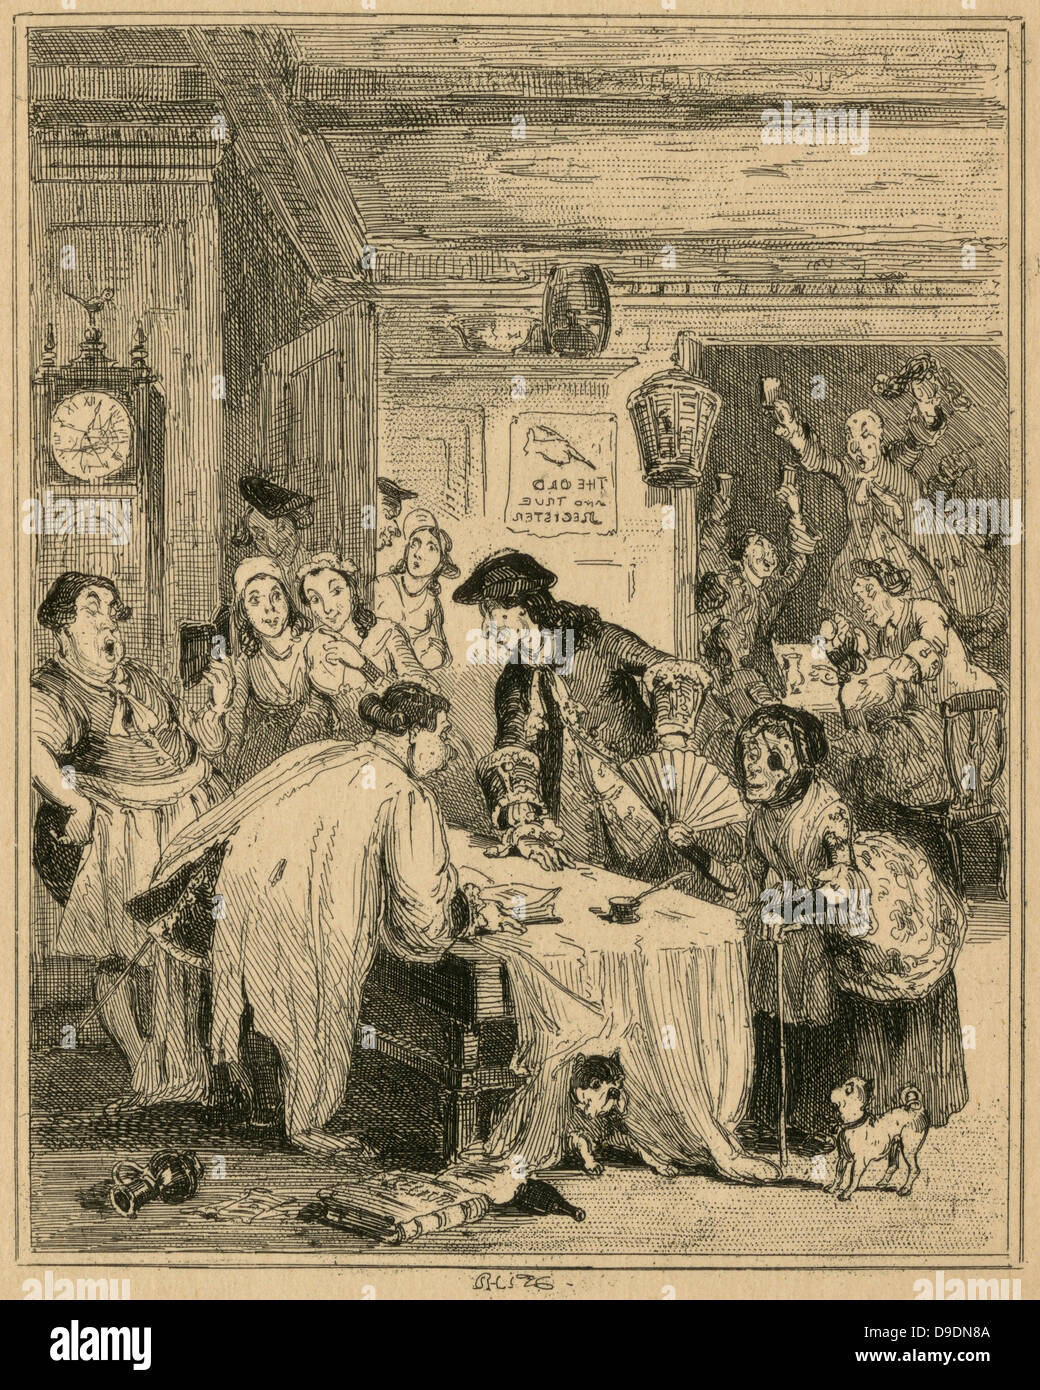 A Fleet Marriage:  Churchmen confined in the Fleet Prison for debtors would marry any couple without asking questions. Illustration by 'Phiz' (1815-1882). Stock Photo